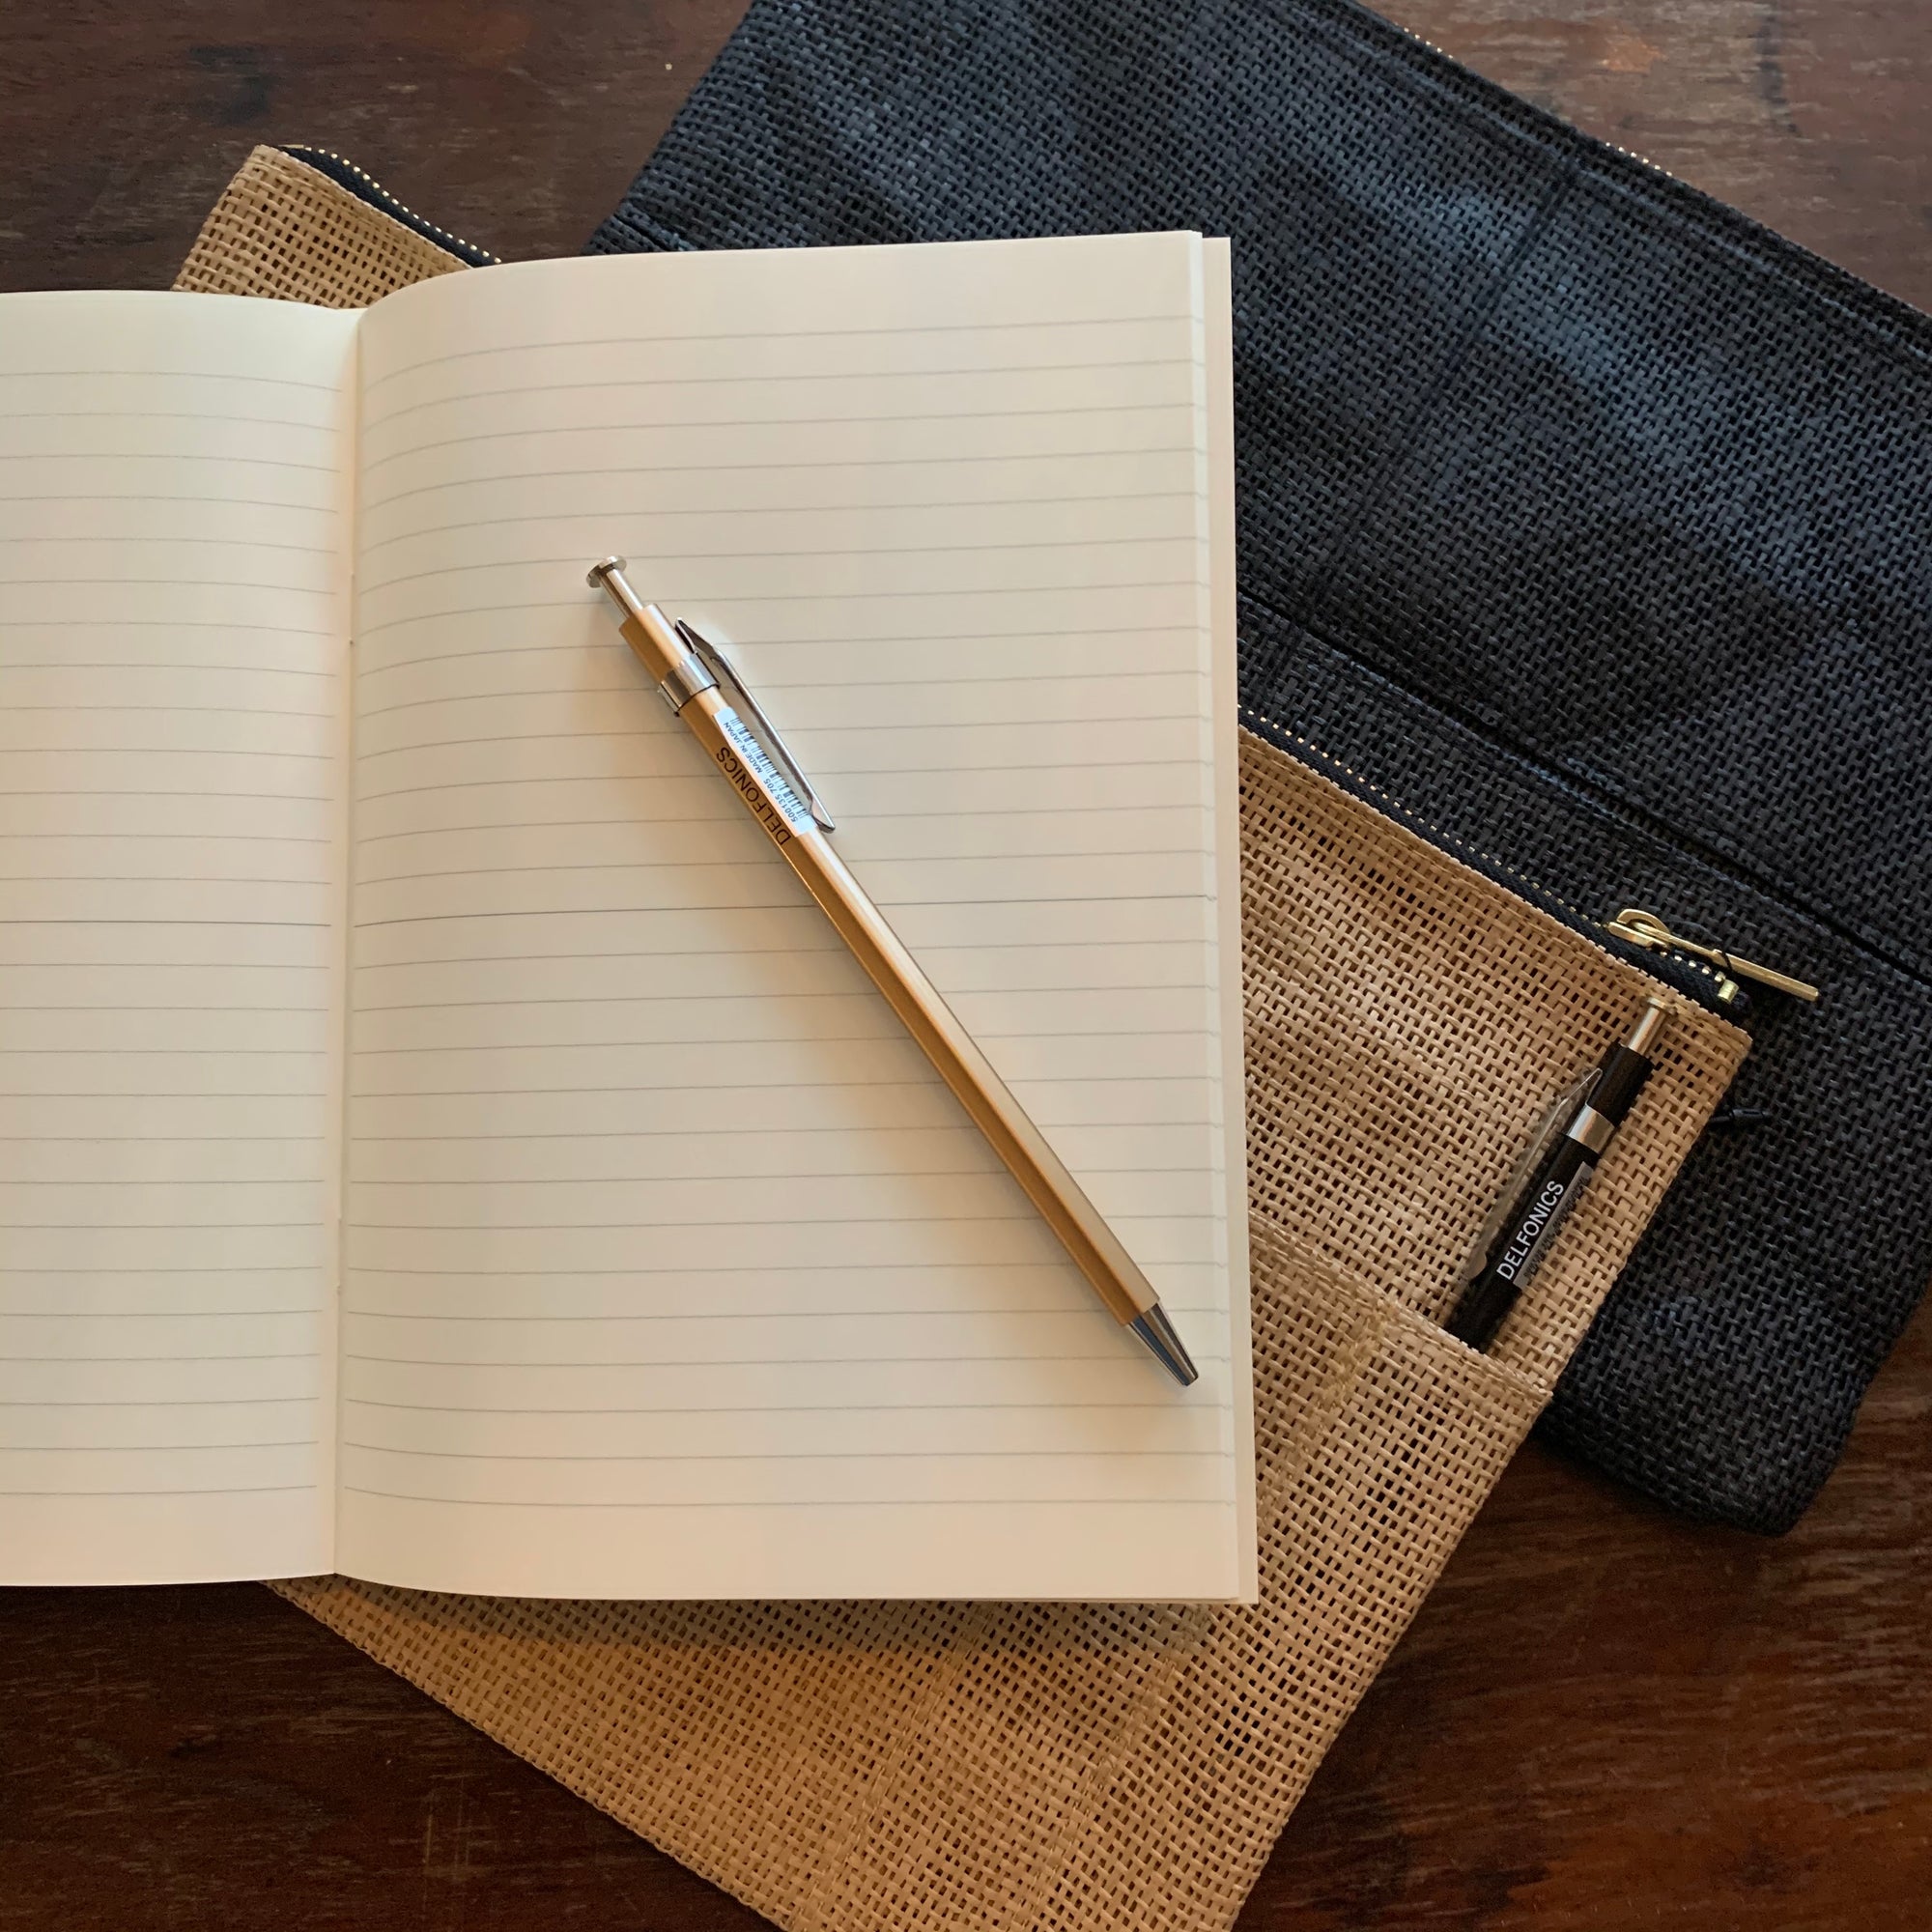 Journaling For Well-Being